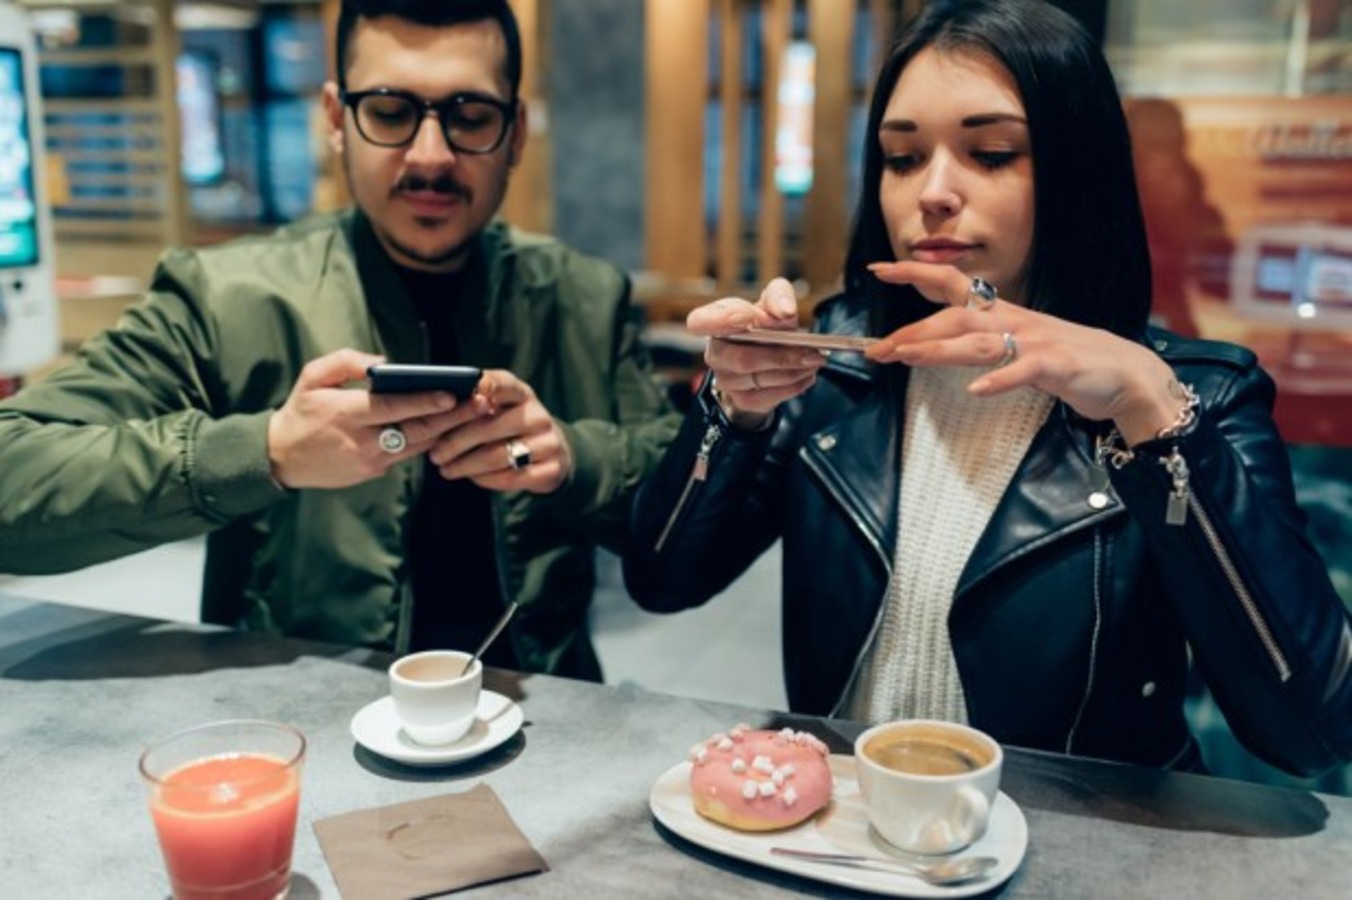 Millennials Check Online Reviews, Gen Zs Turn to Influencers for Restaurant Recommendations